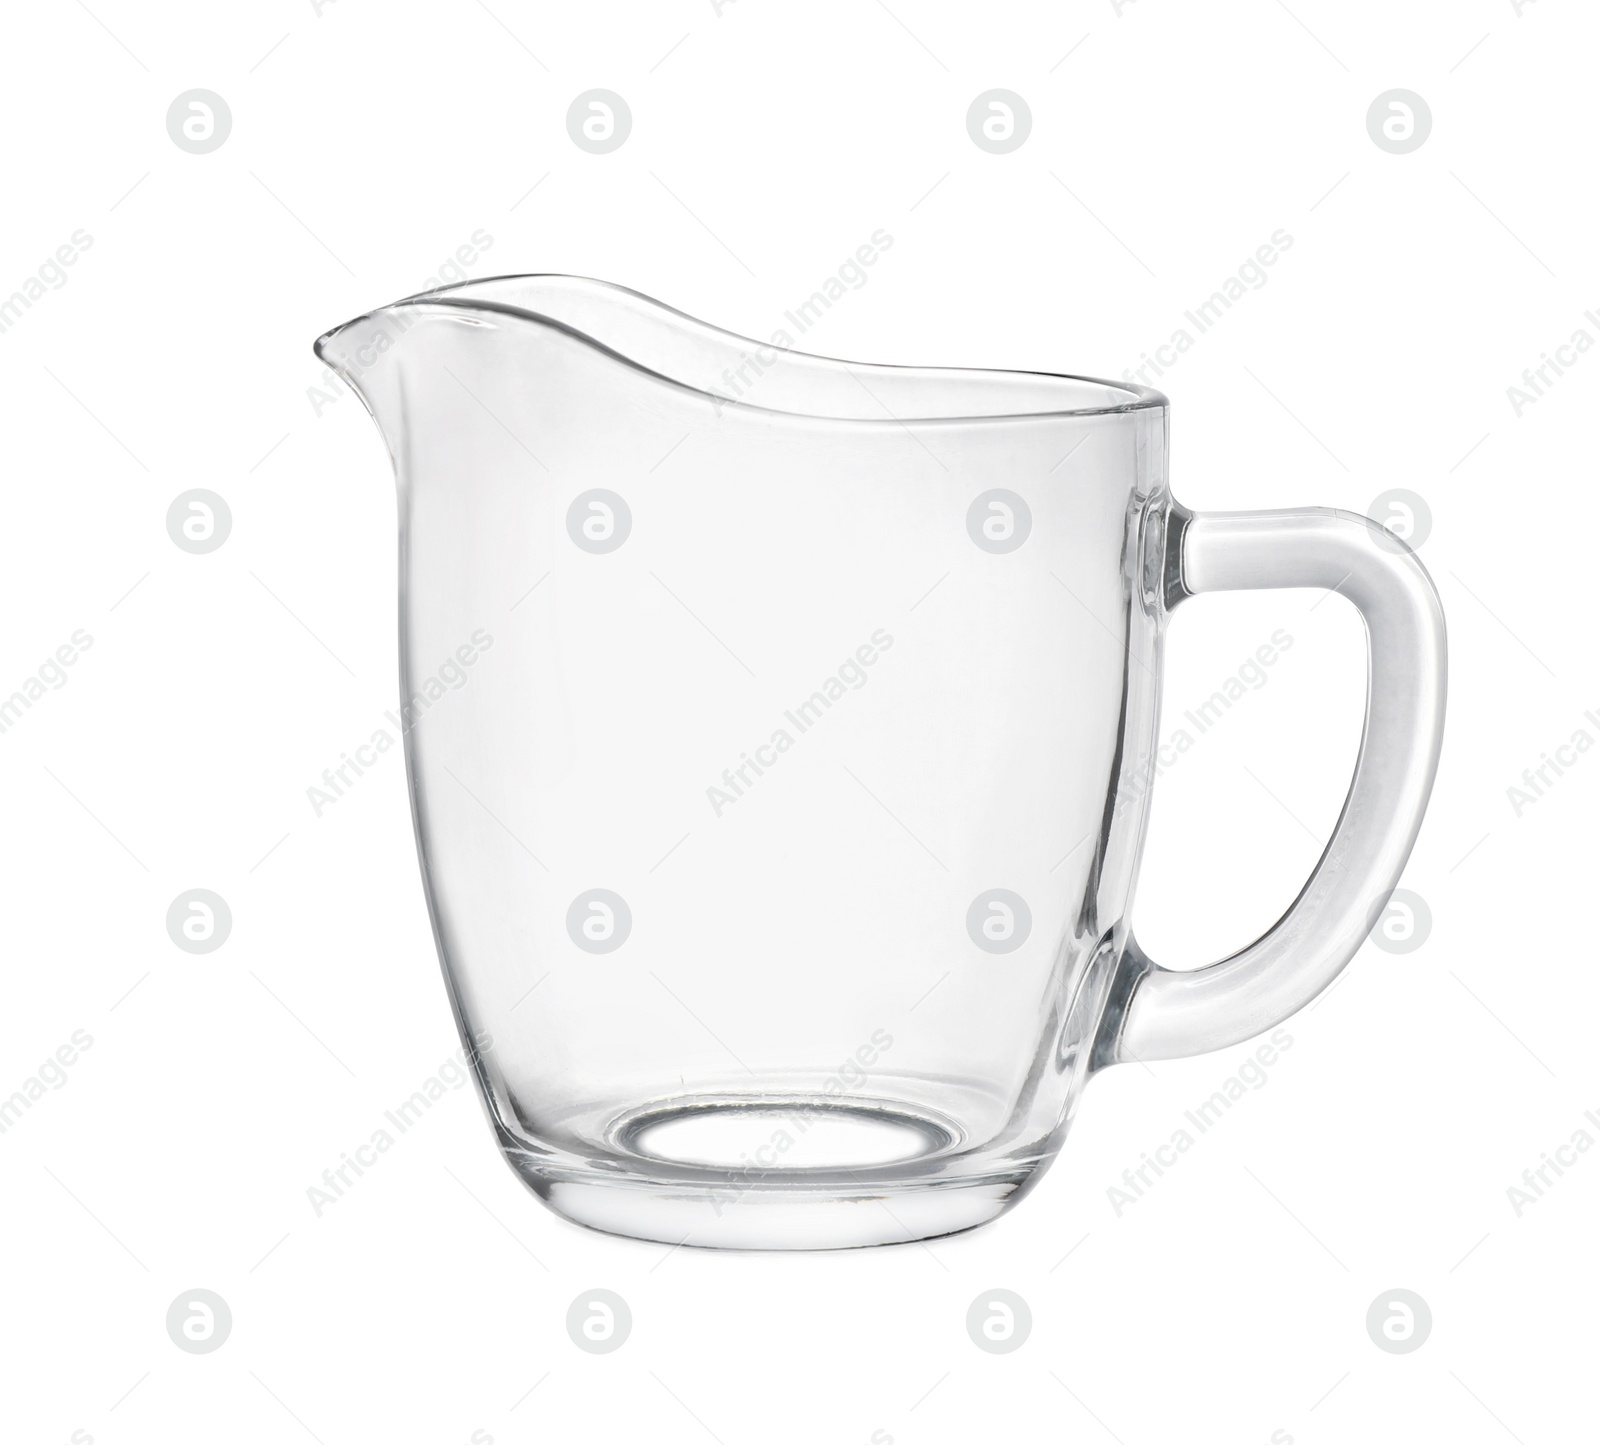 Photo of Empty glass pitcher with handle isolated on white